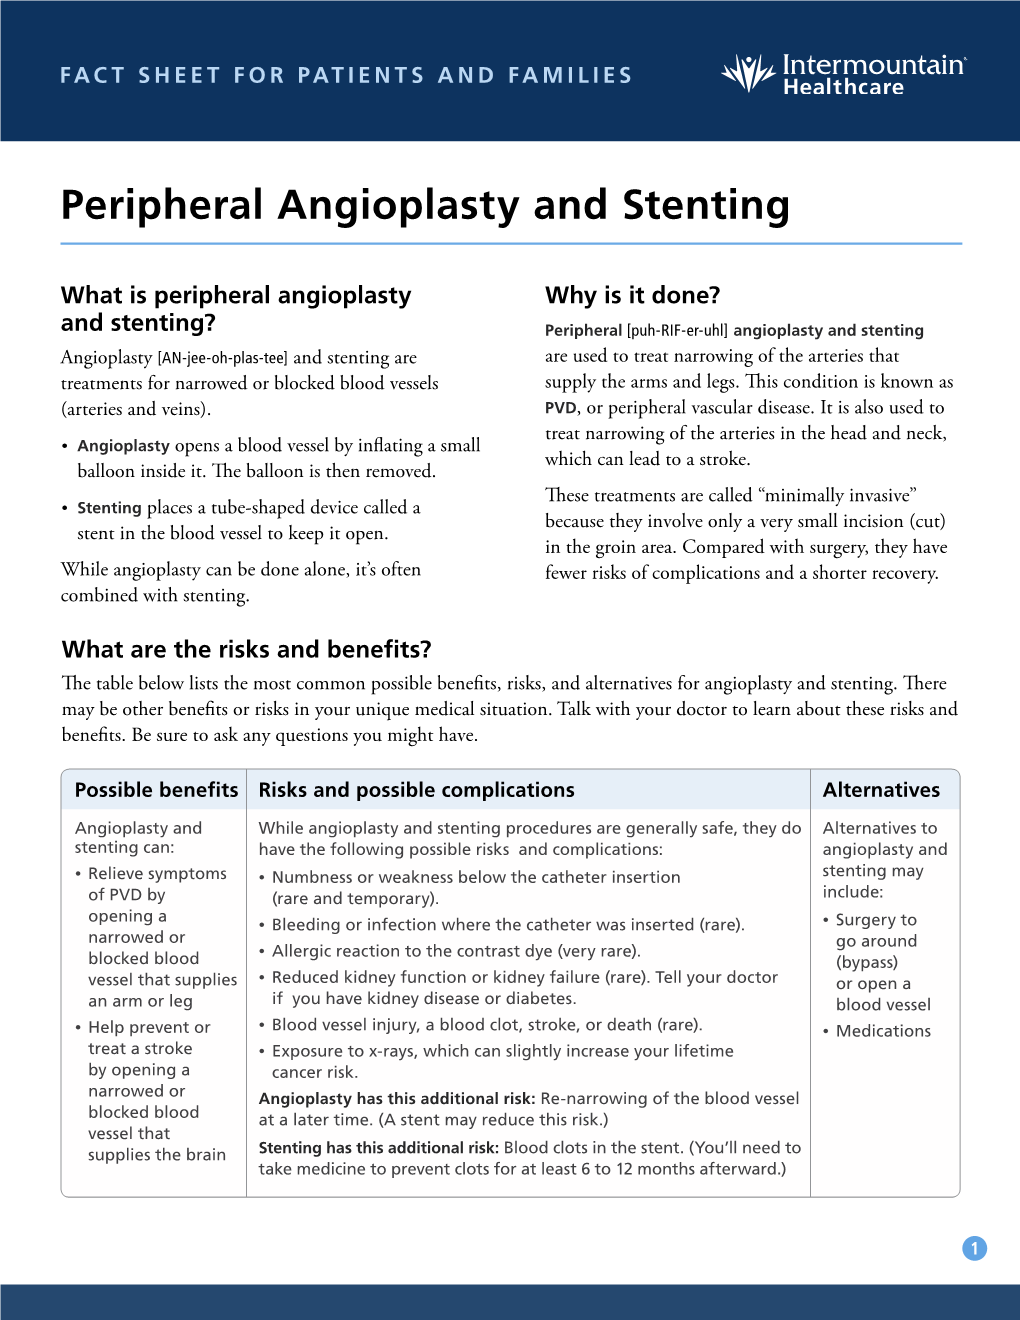 Peripheral Angioplasty and Stenting Fact Sheet